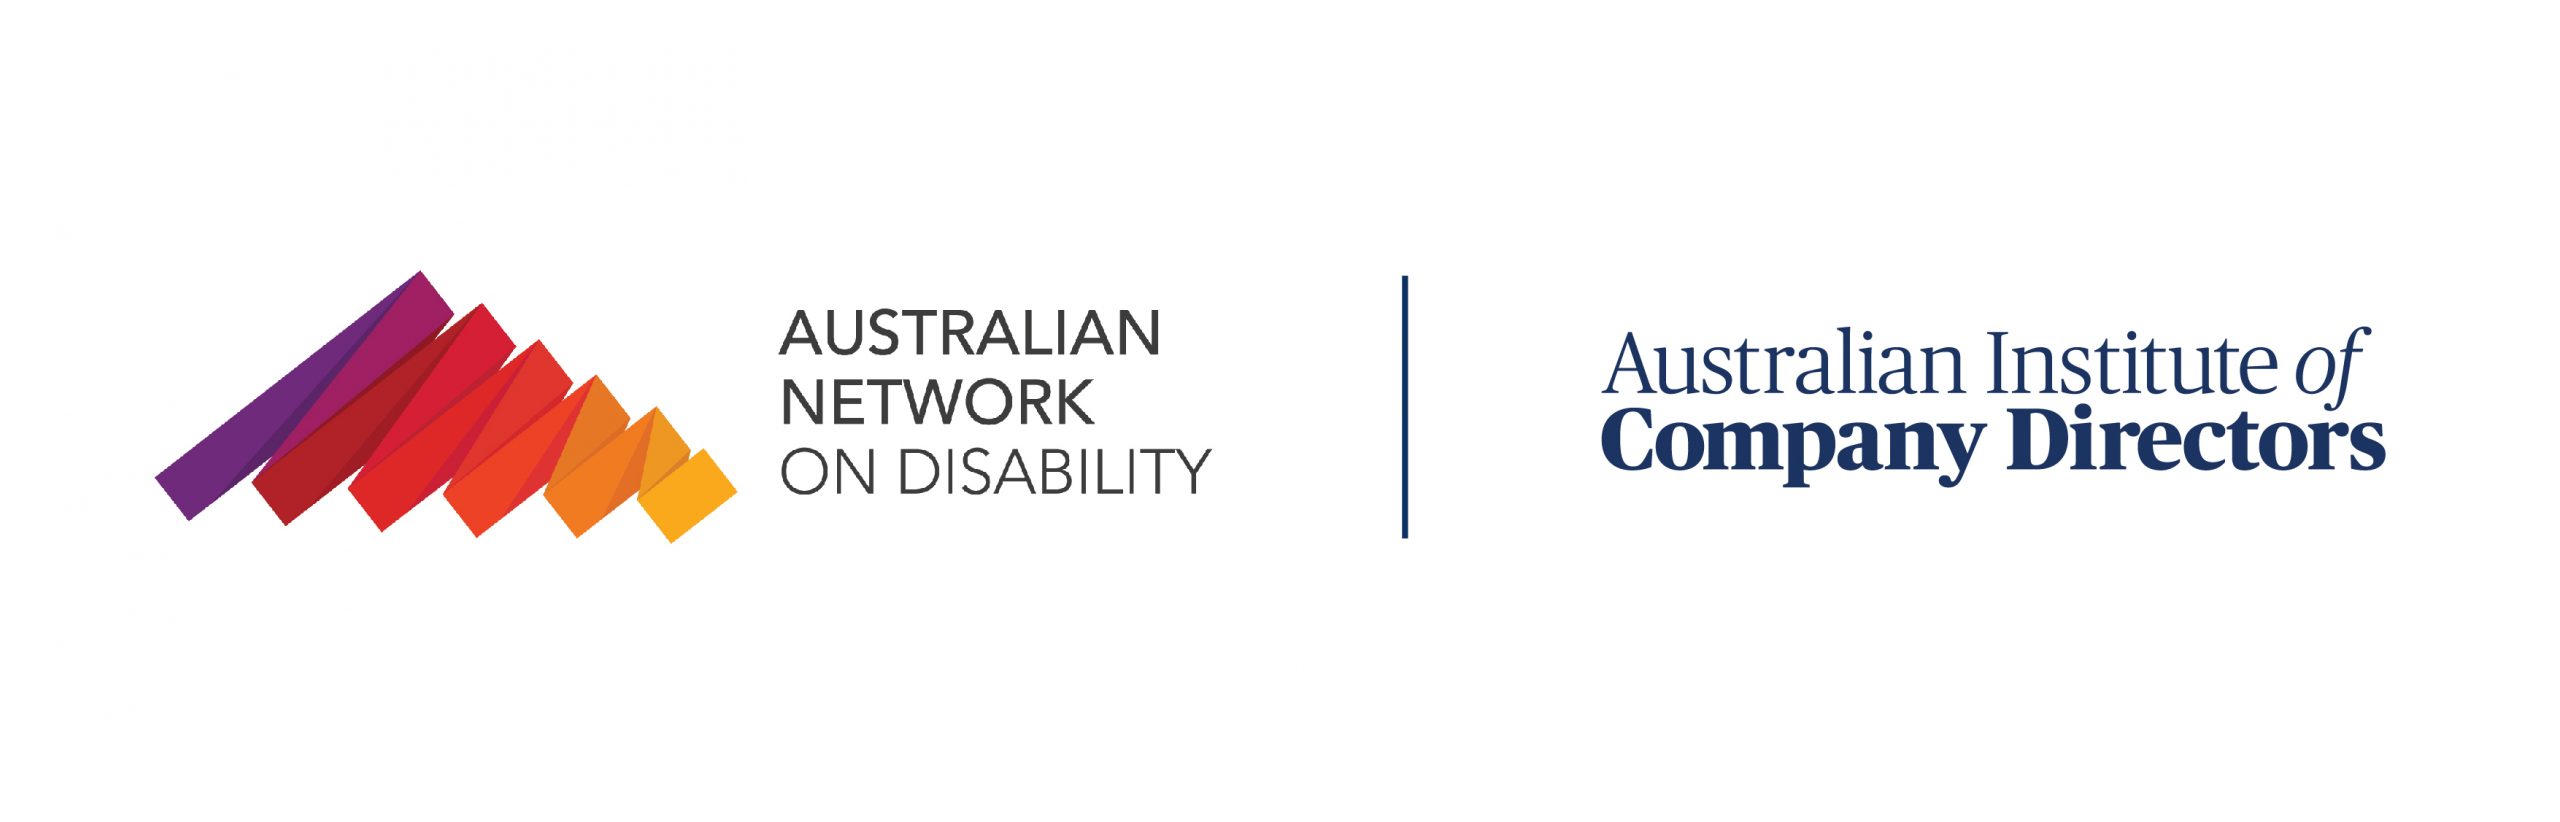 Australian Disability Network and Australian Institute of Company Directors